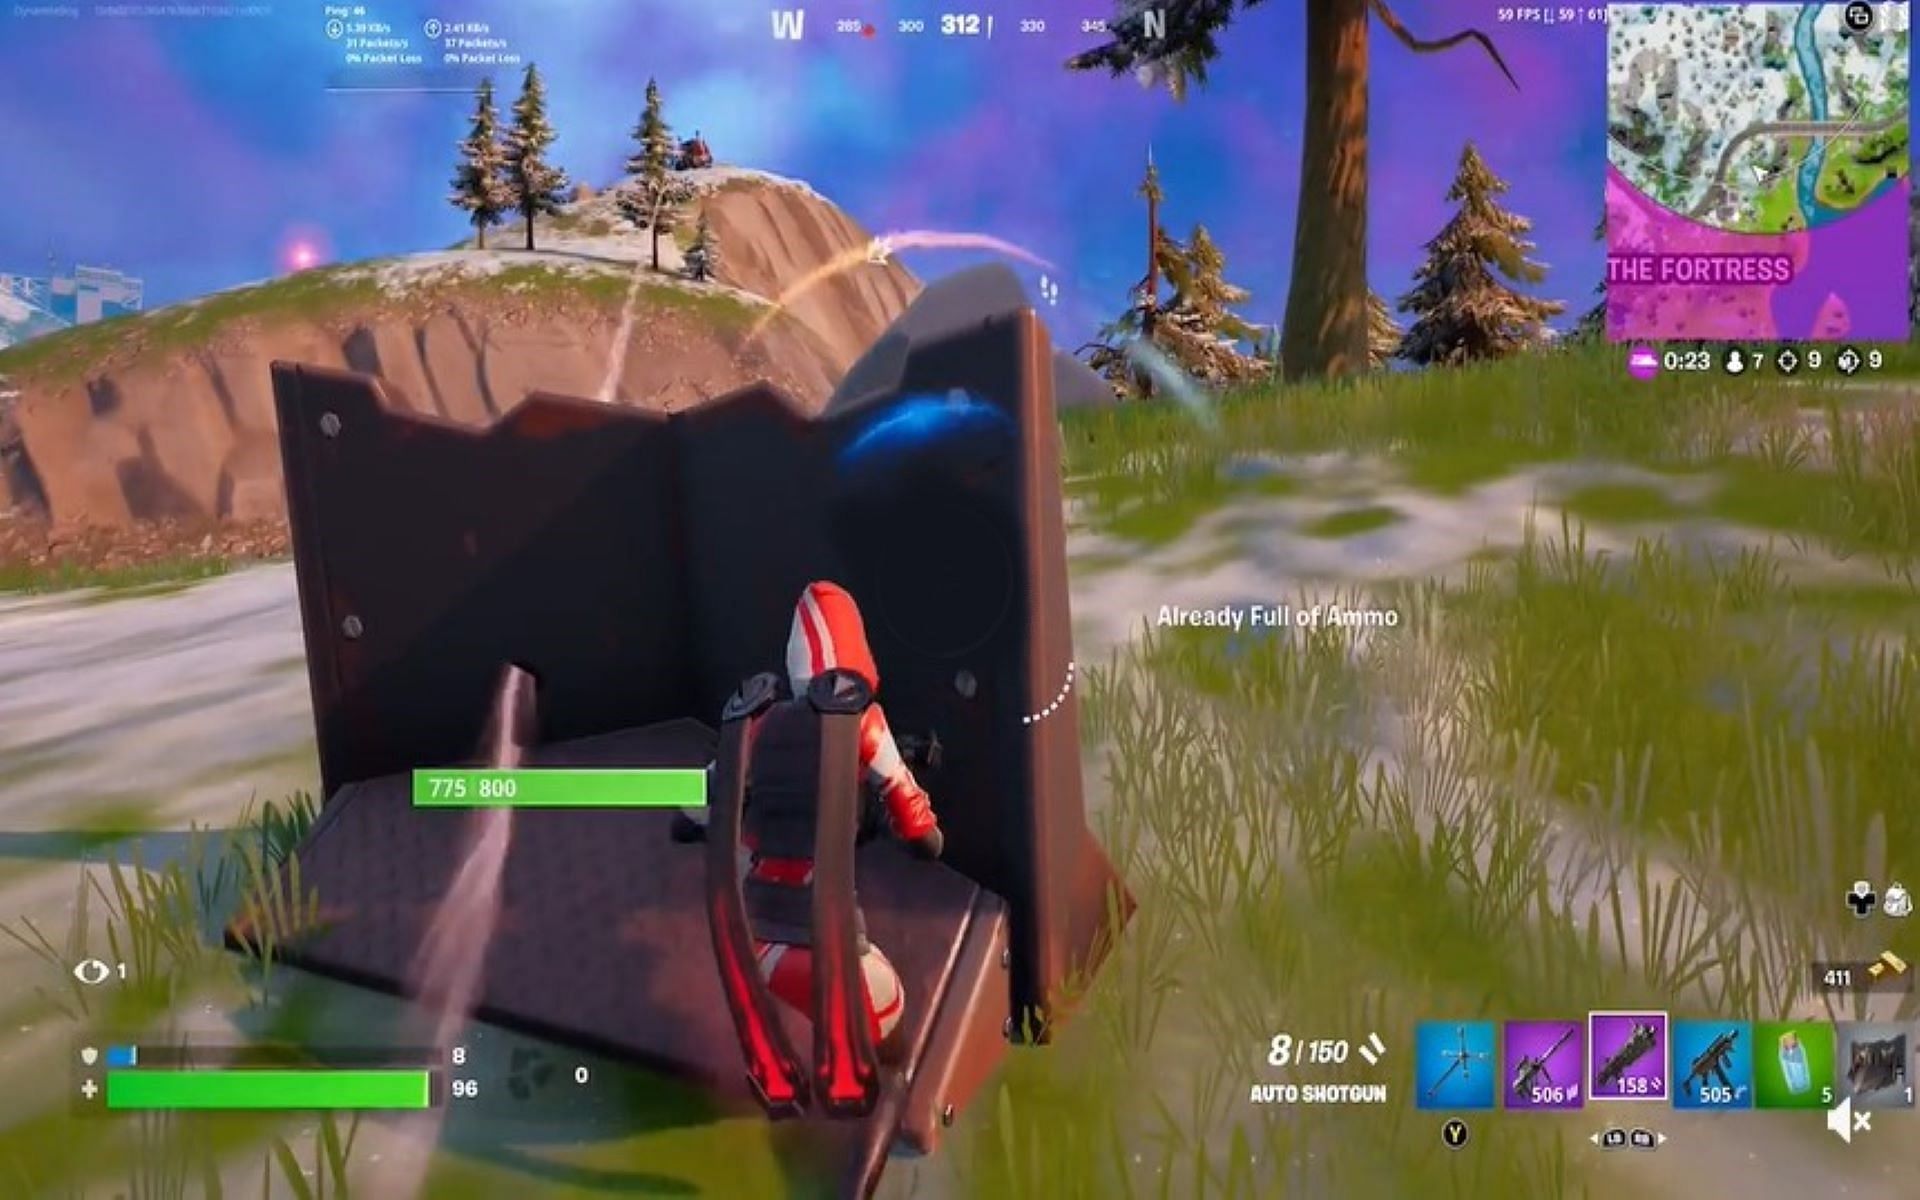 Fortnite exploit allows gamers to be eliminated even when they are behind covers (Image via Radioactivejason2004/Reddit)